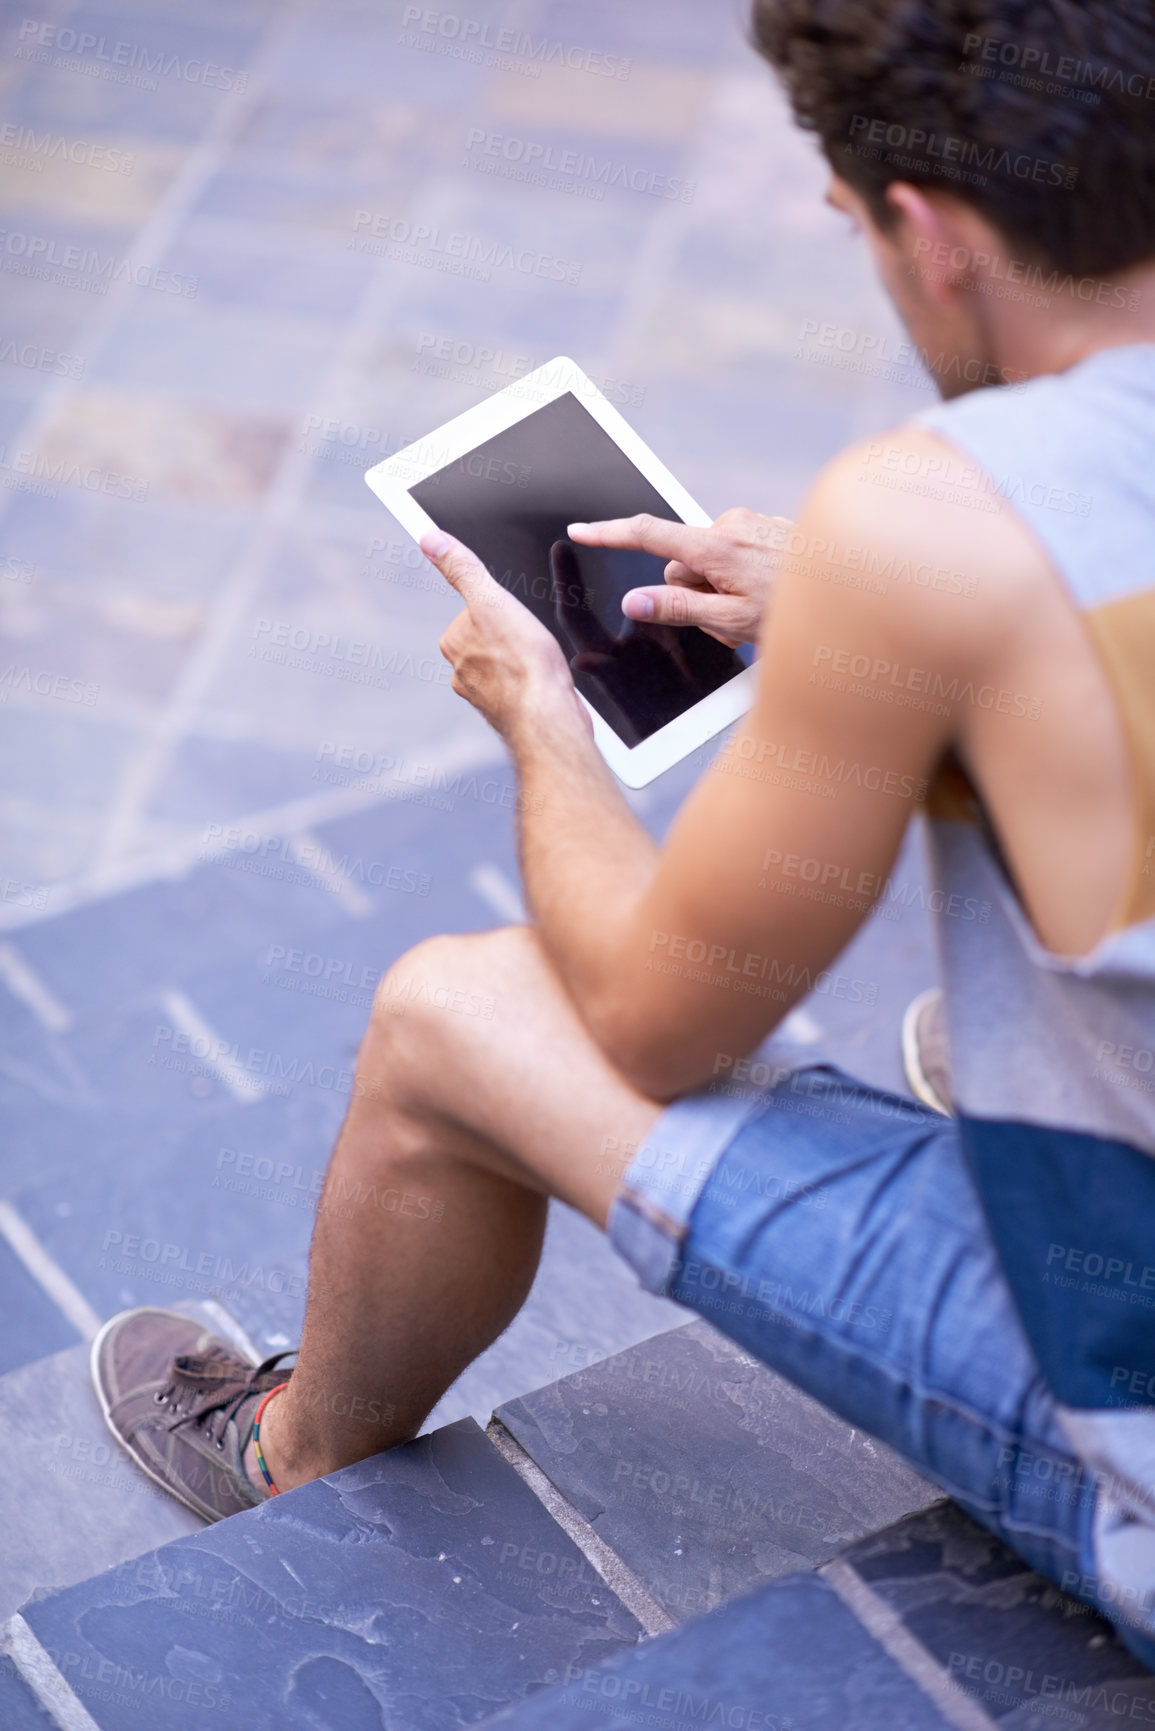 Buy stock photo Over the shoulder shot of a young man sitting on steps using a tablet